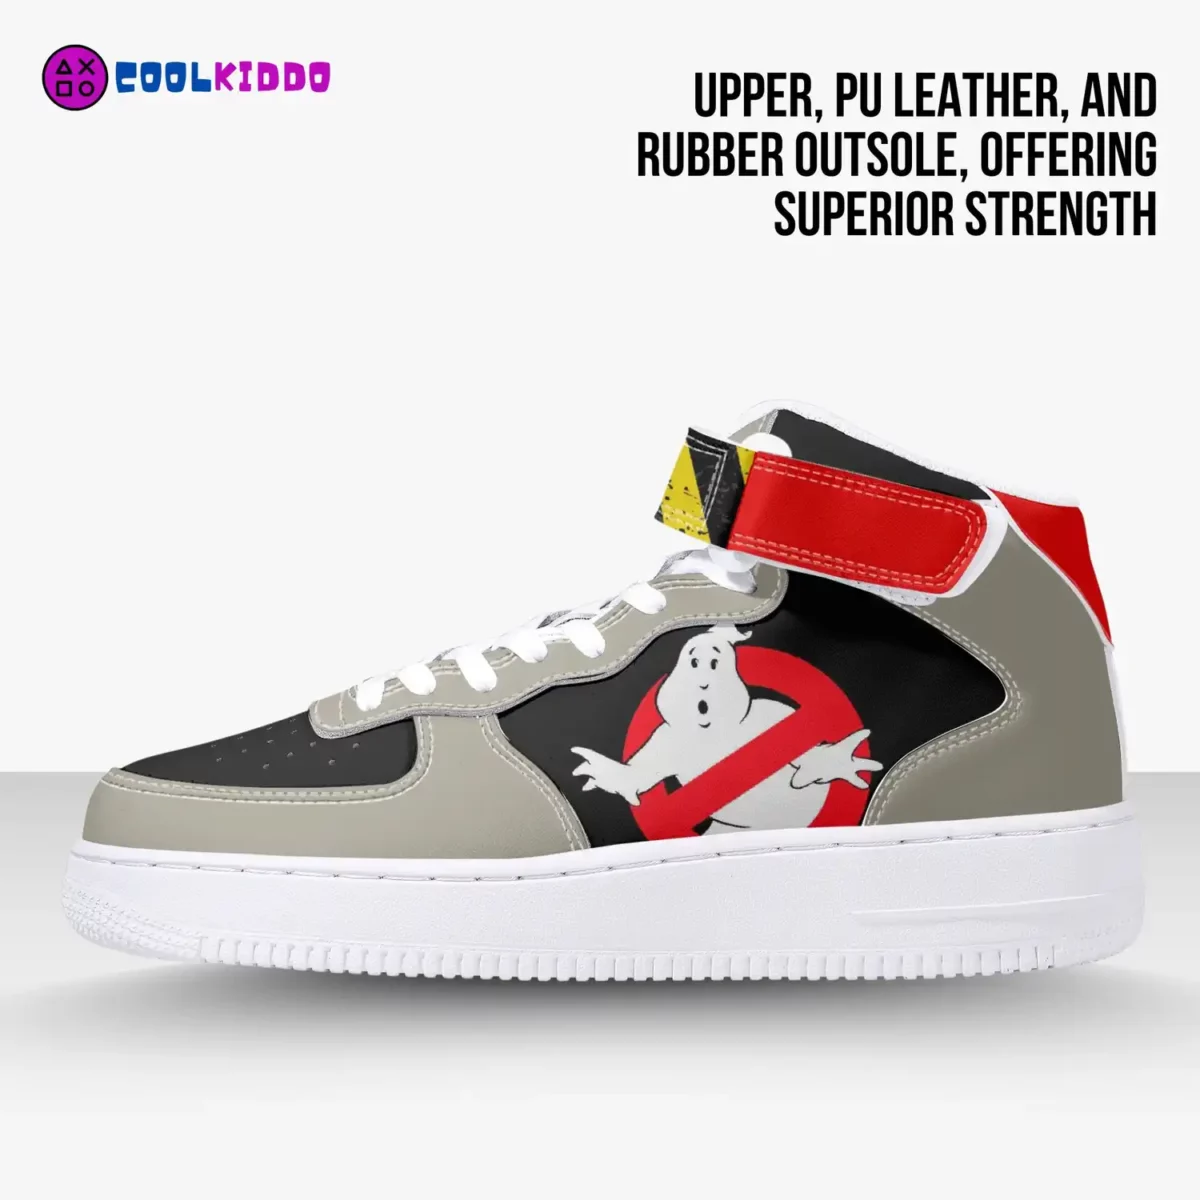 Custom GHOSTBUSTERS Air Force One Style High-Top Leather Sneakers – Casual Shoes for Youth/Adults Cool Kiddo 12